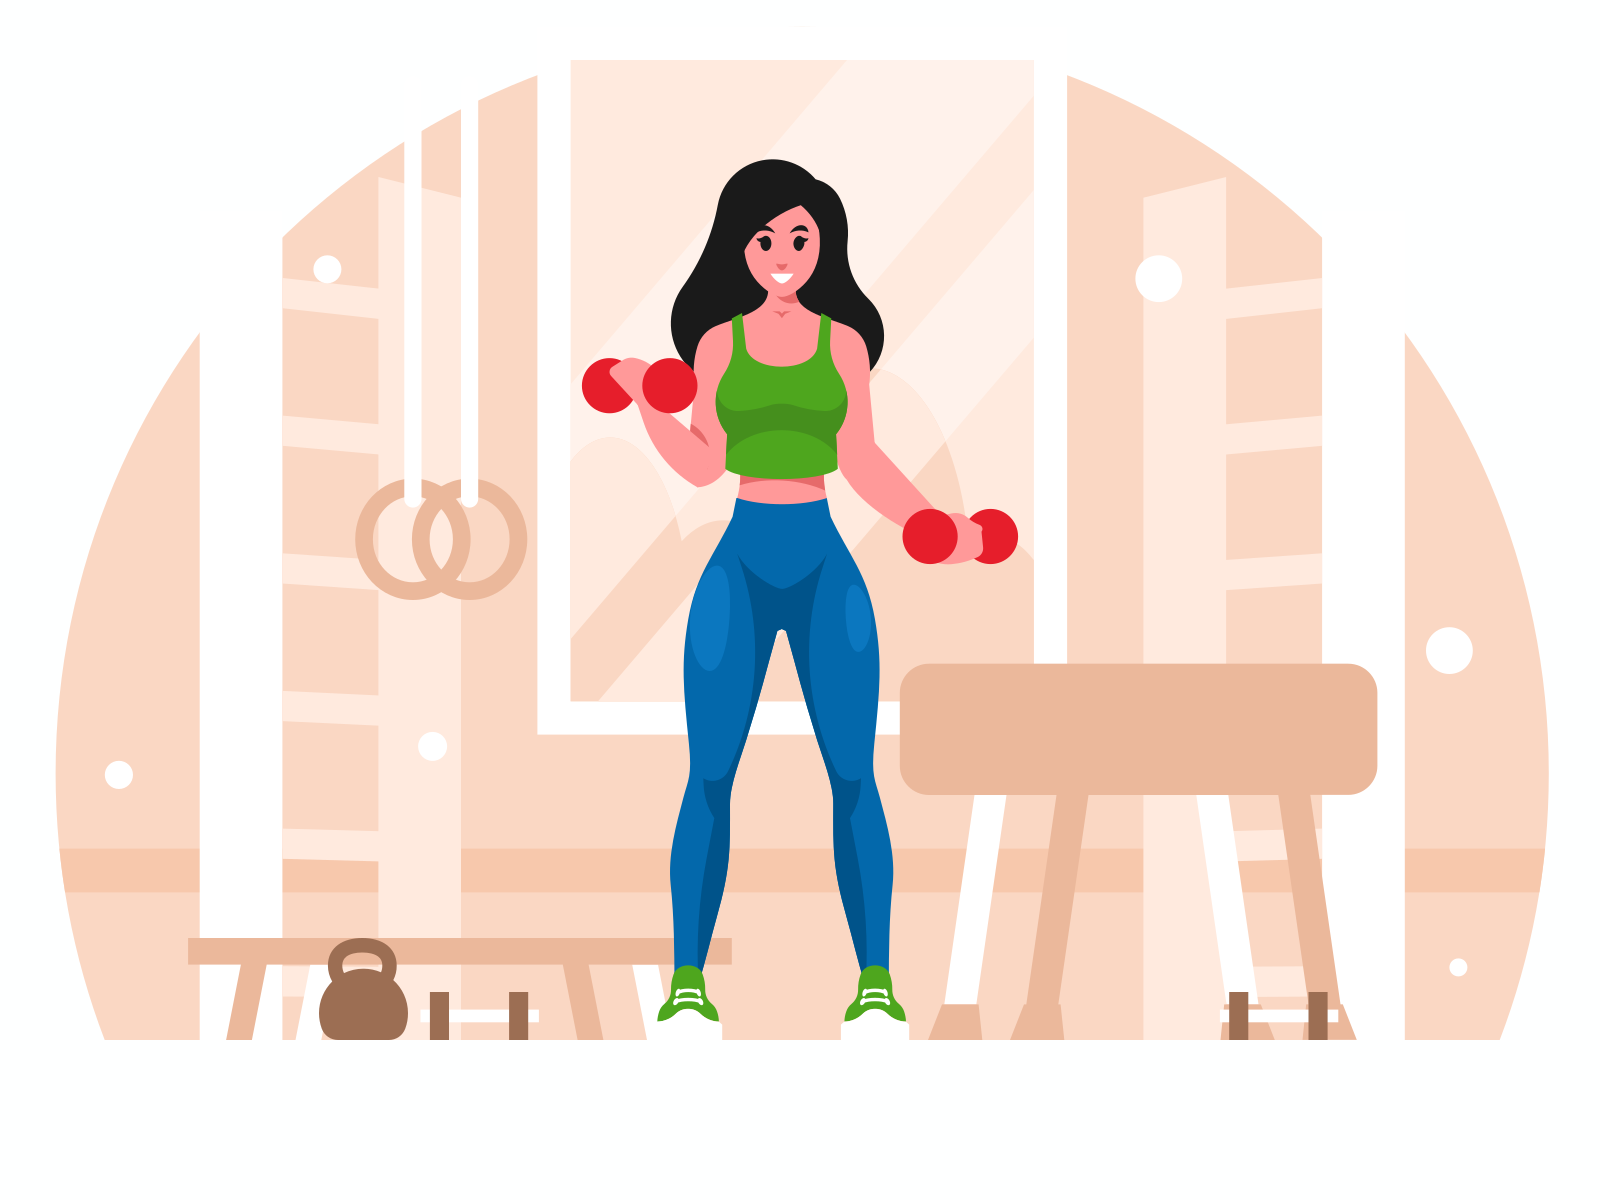 Woman with dumbbells